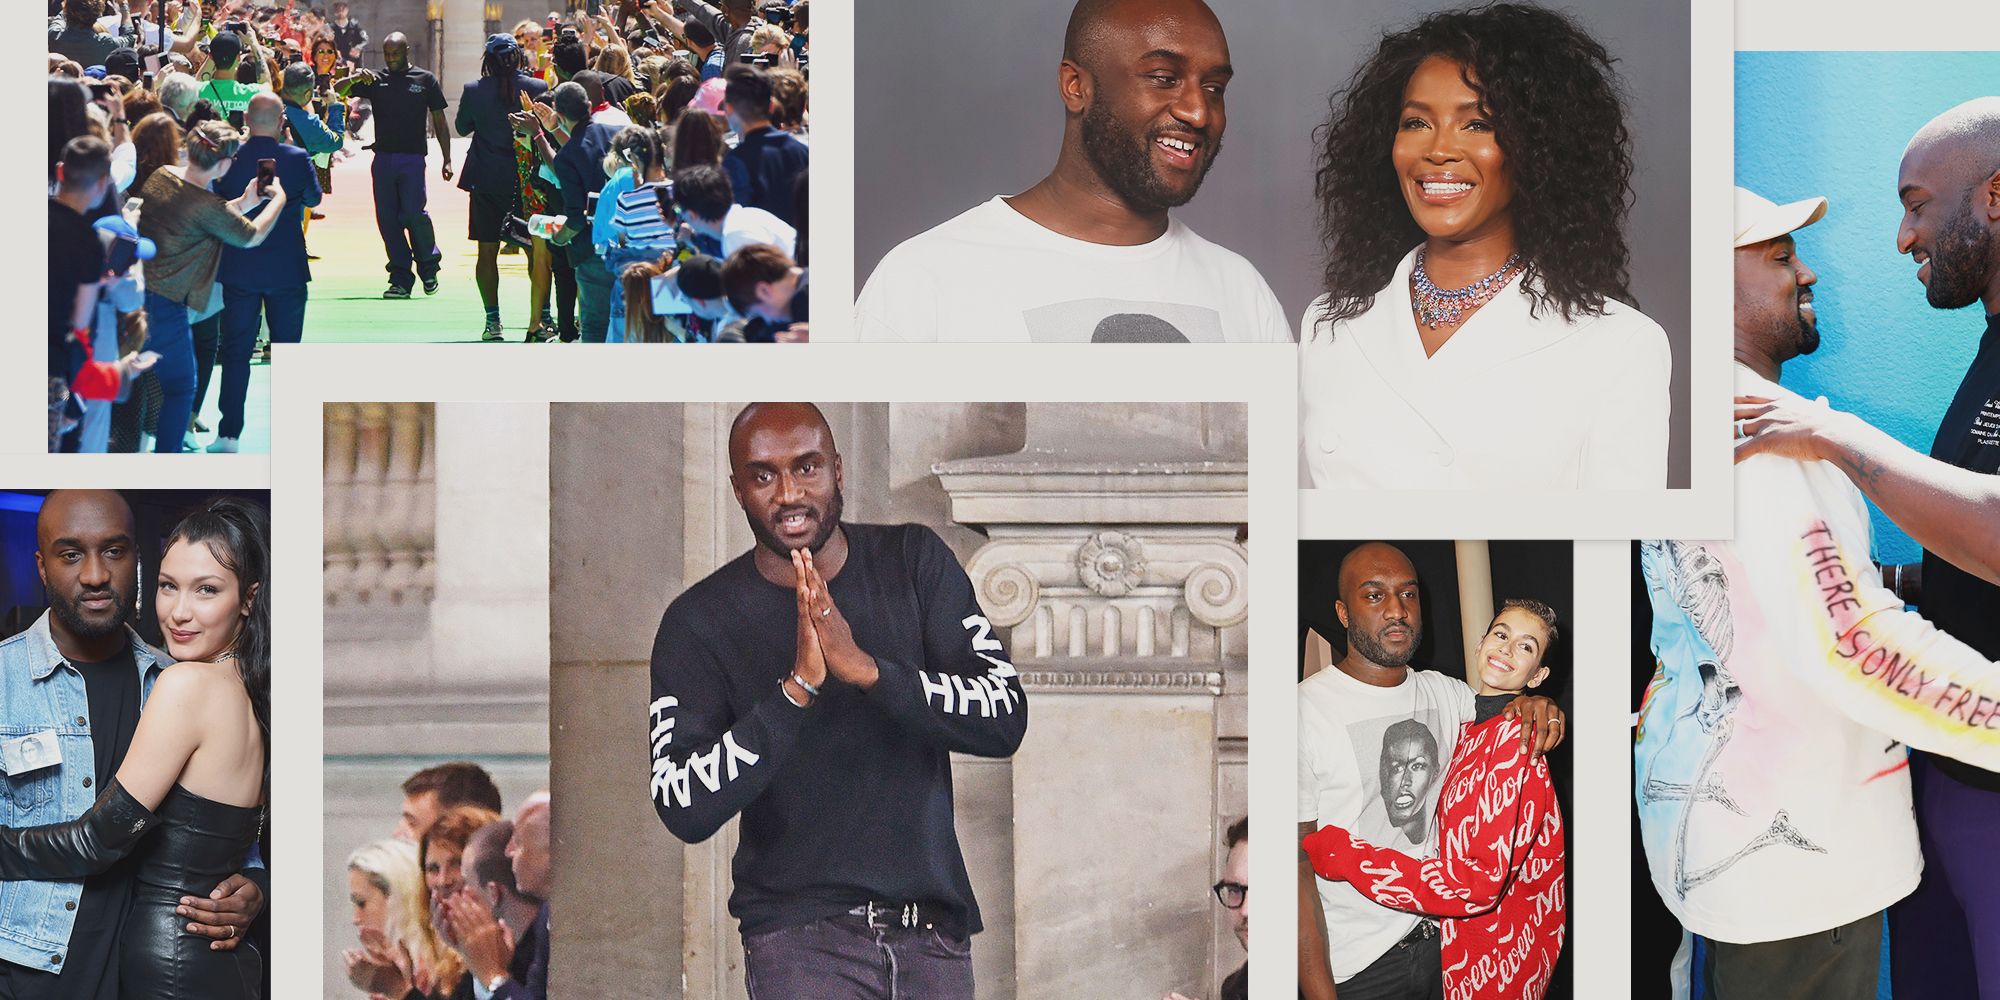 Virgil Was Here”: A Look back at the Life of Virgil Abloh [PHOTOS